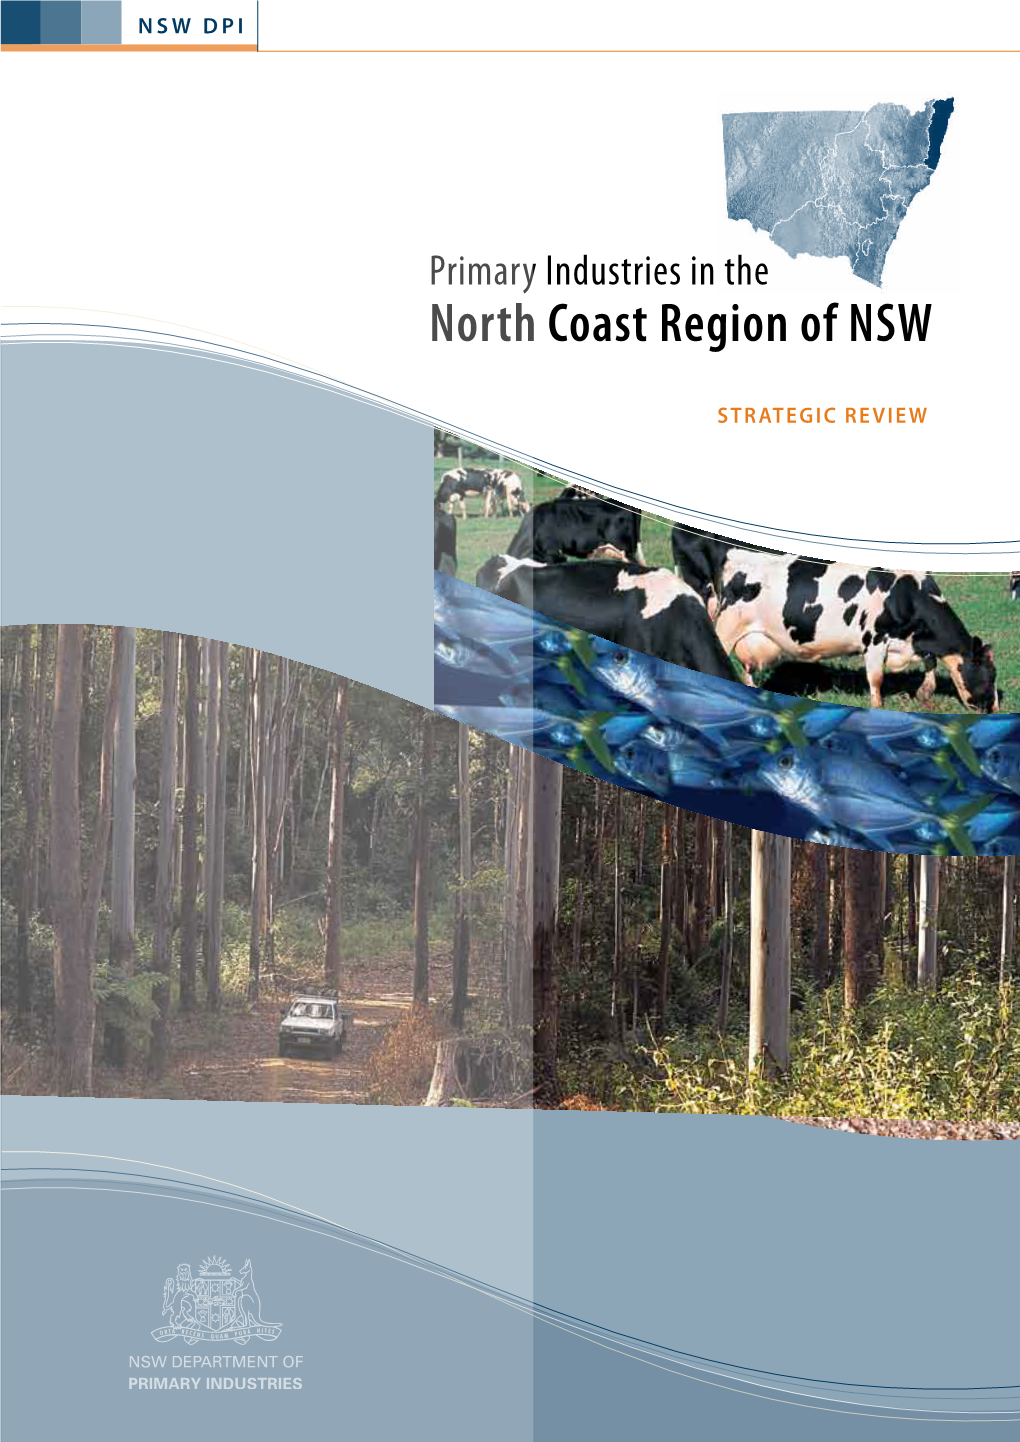 Primary Industries in the North Coast Region of NSW